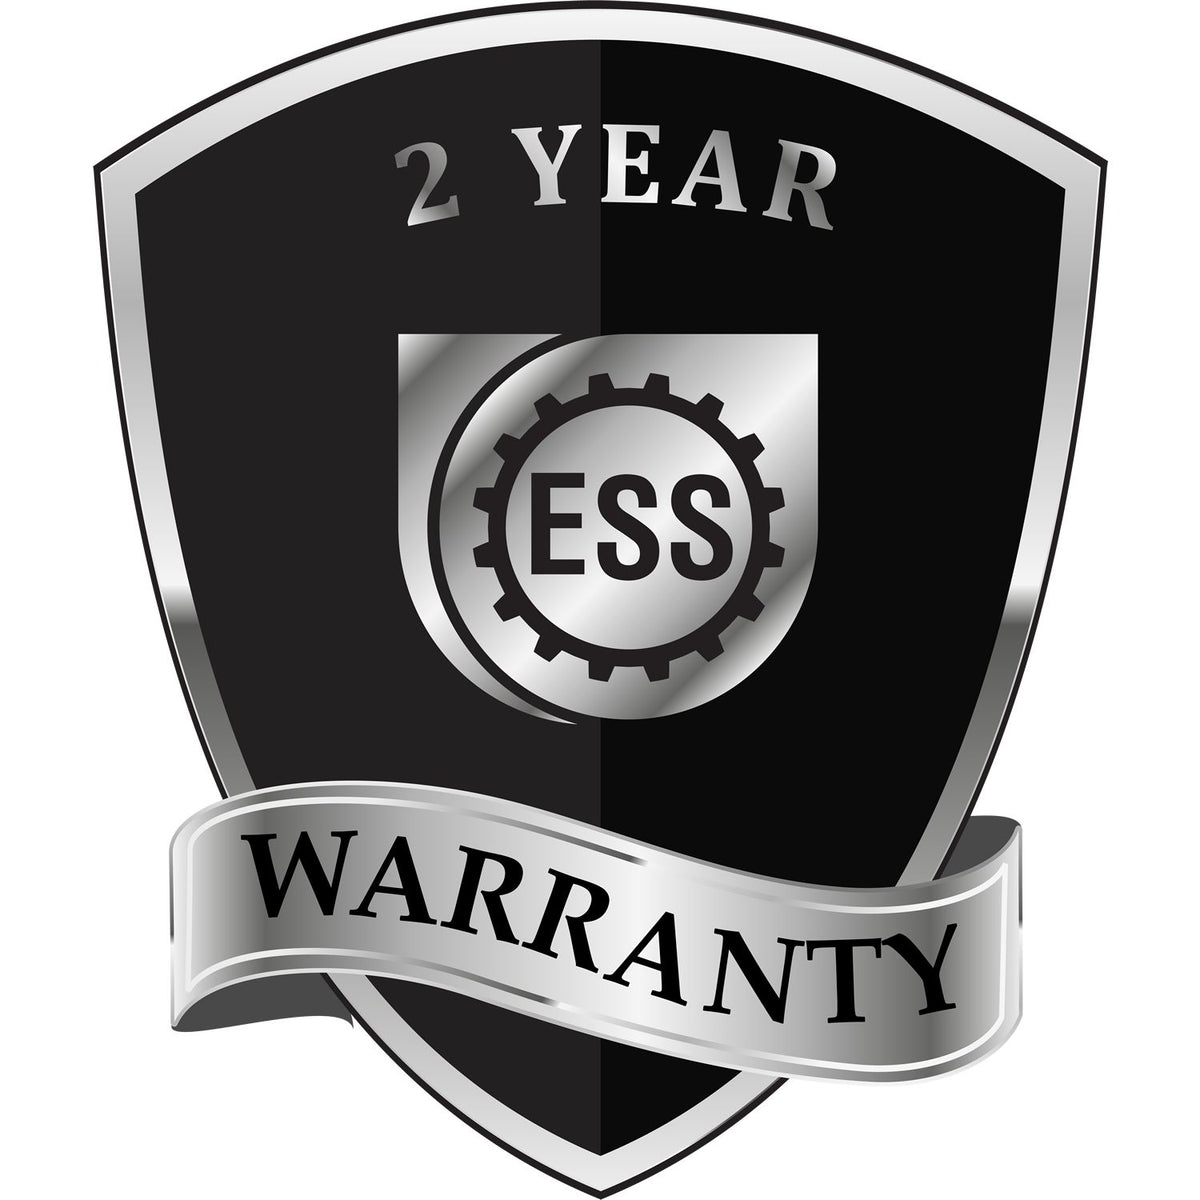 A black and silver badge or emblem showing warranty information for the Gift New York Geologist Seal